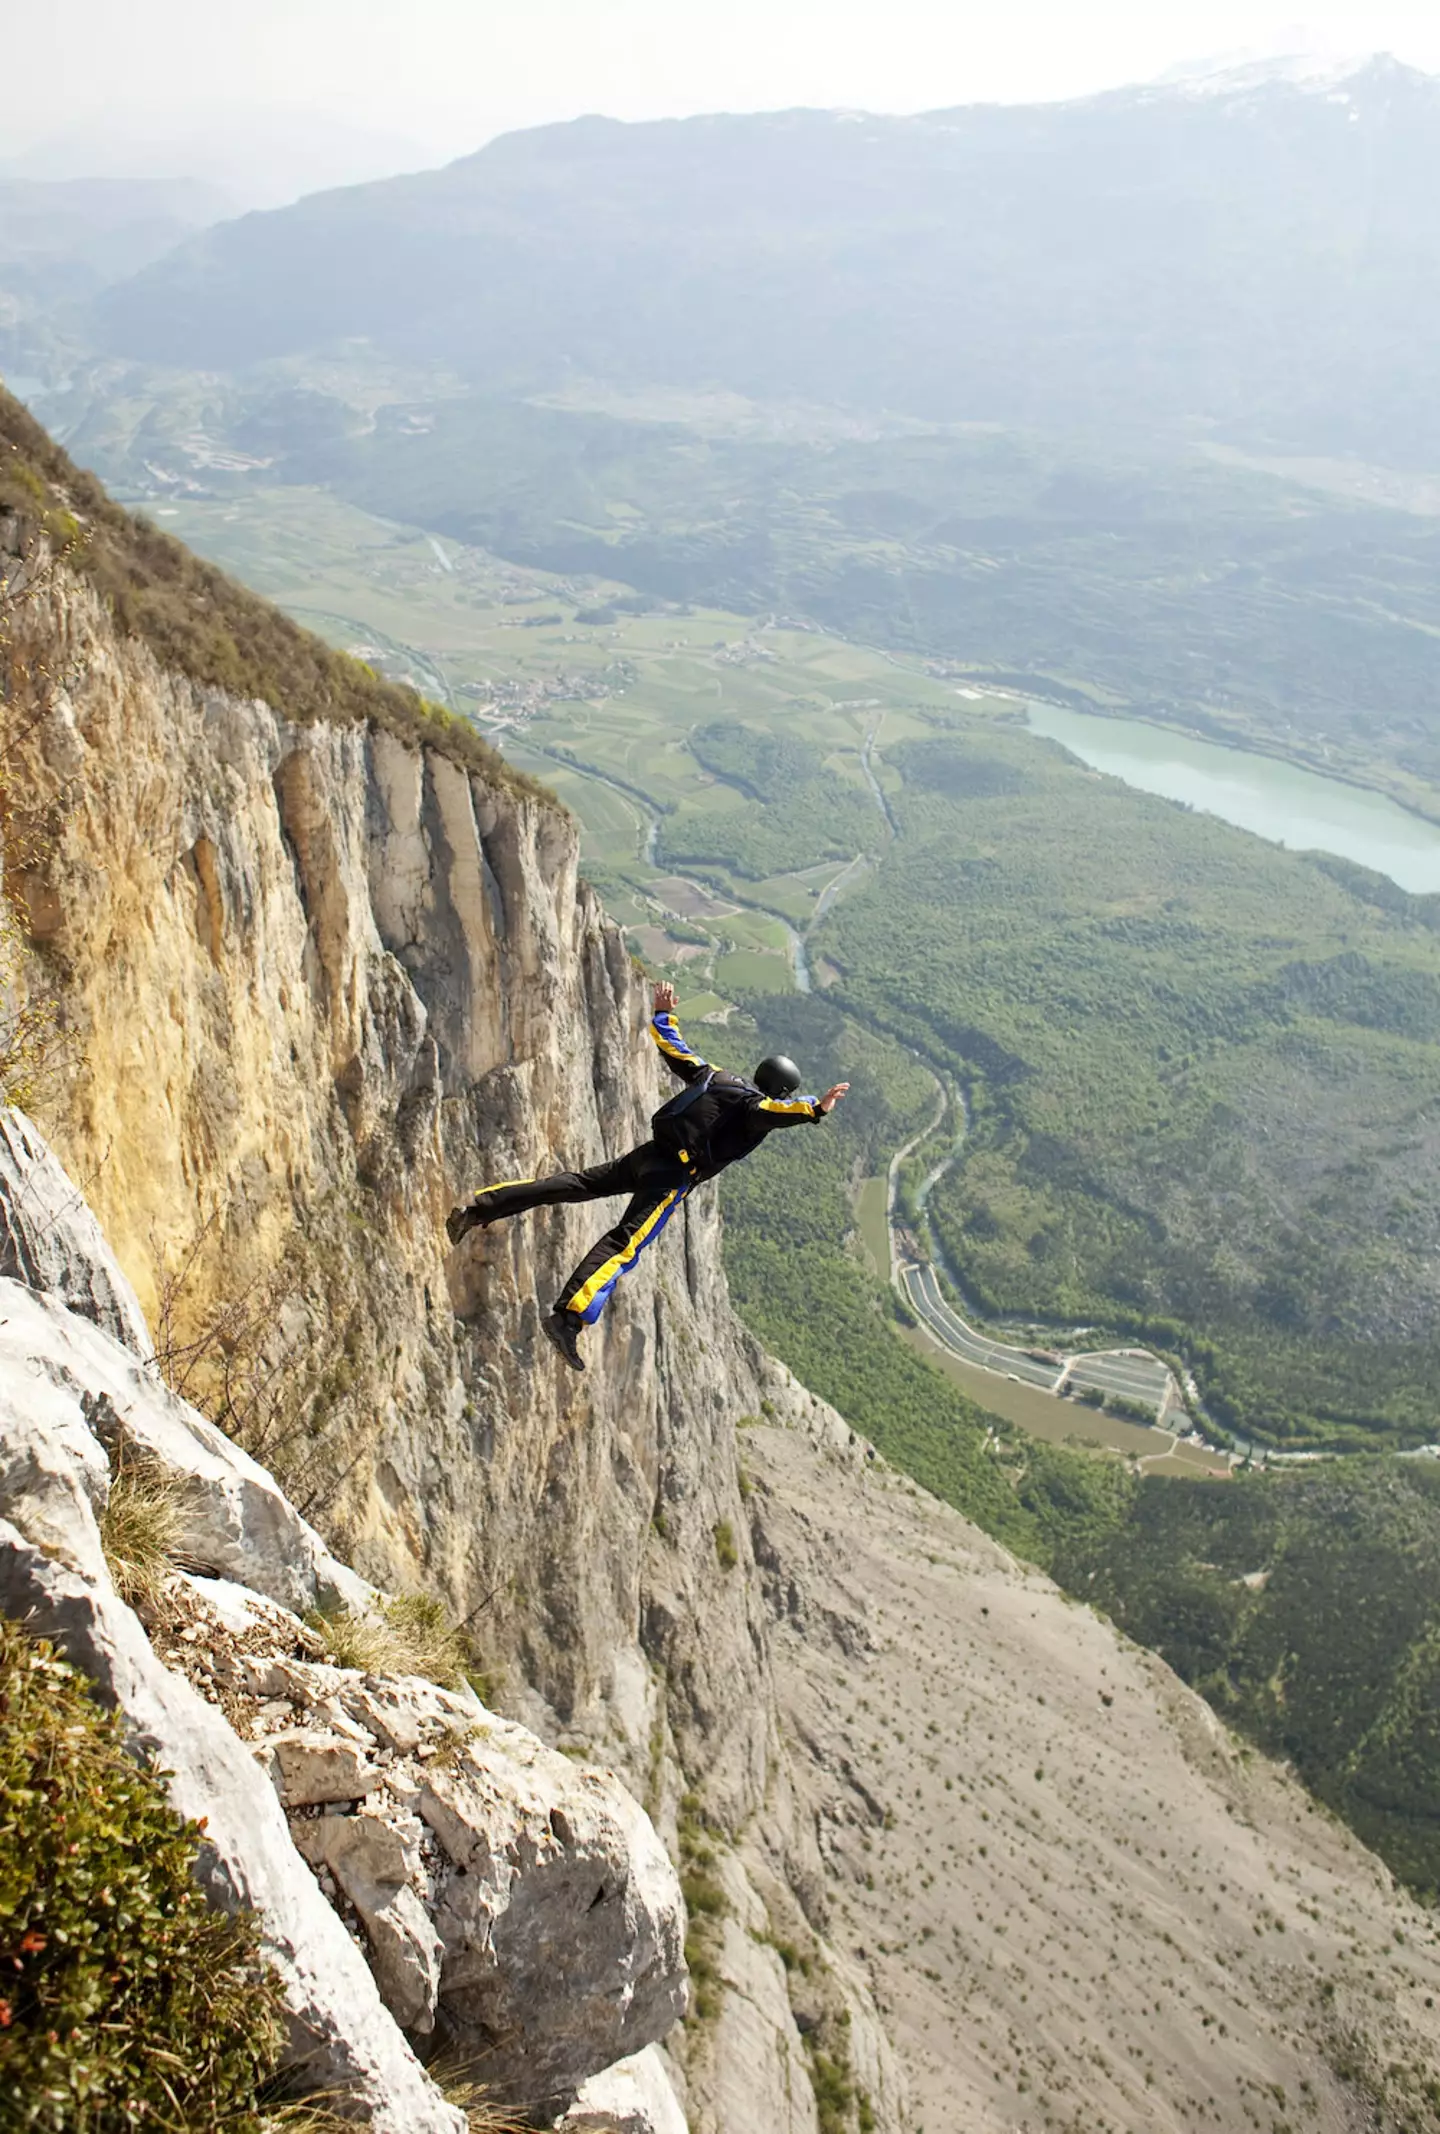 Monte Brento is a popular base jumping destination in Italy.